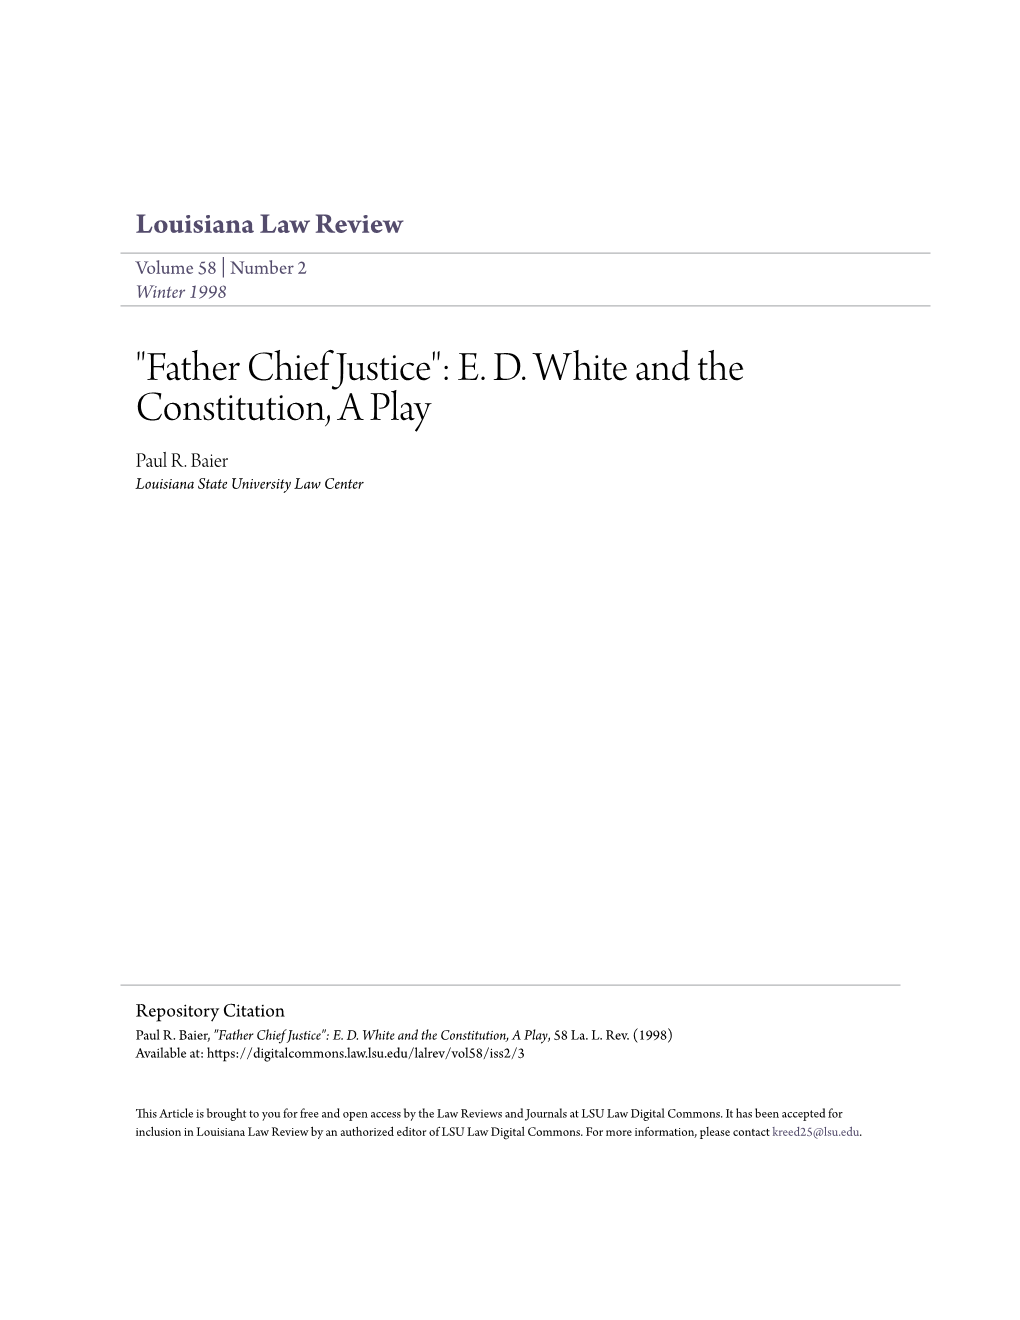 "Father Chief Justice": E. D. White and the Constitution, a Play Paul R